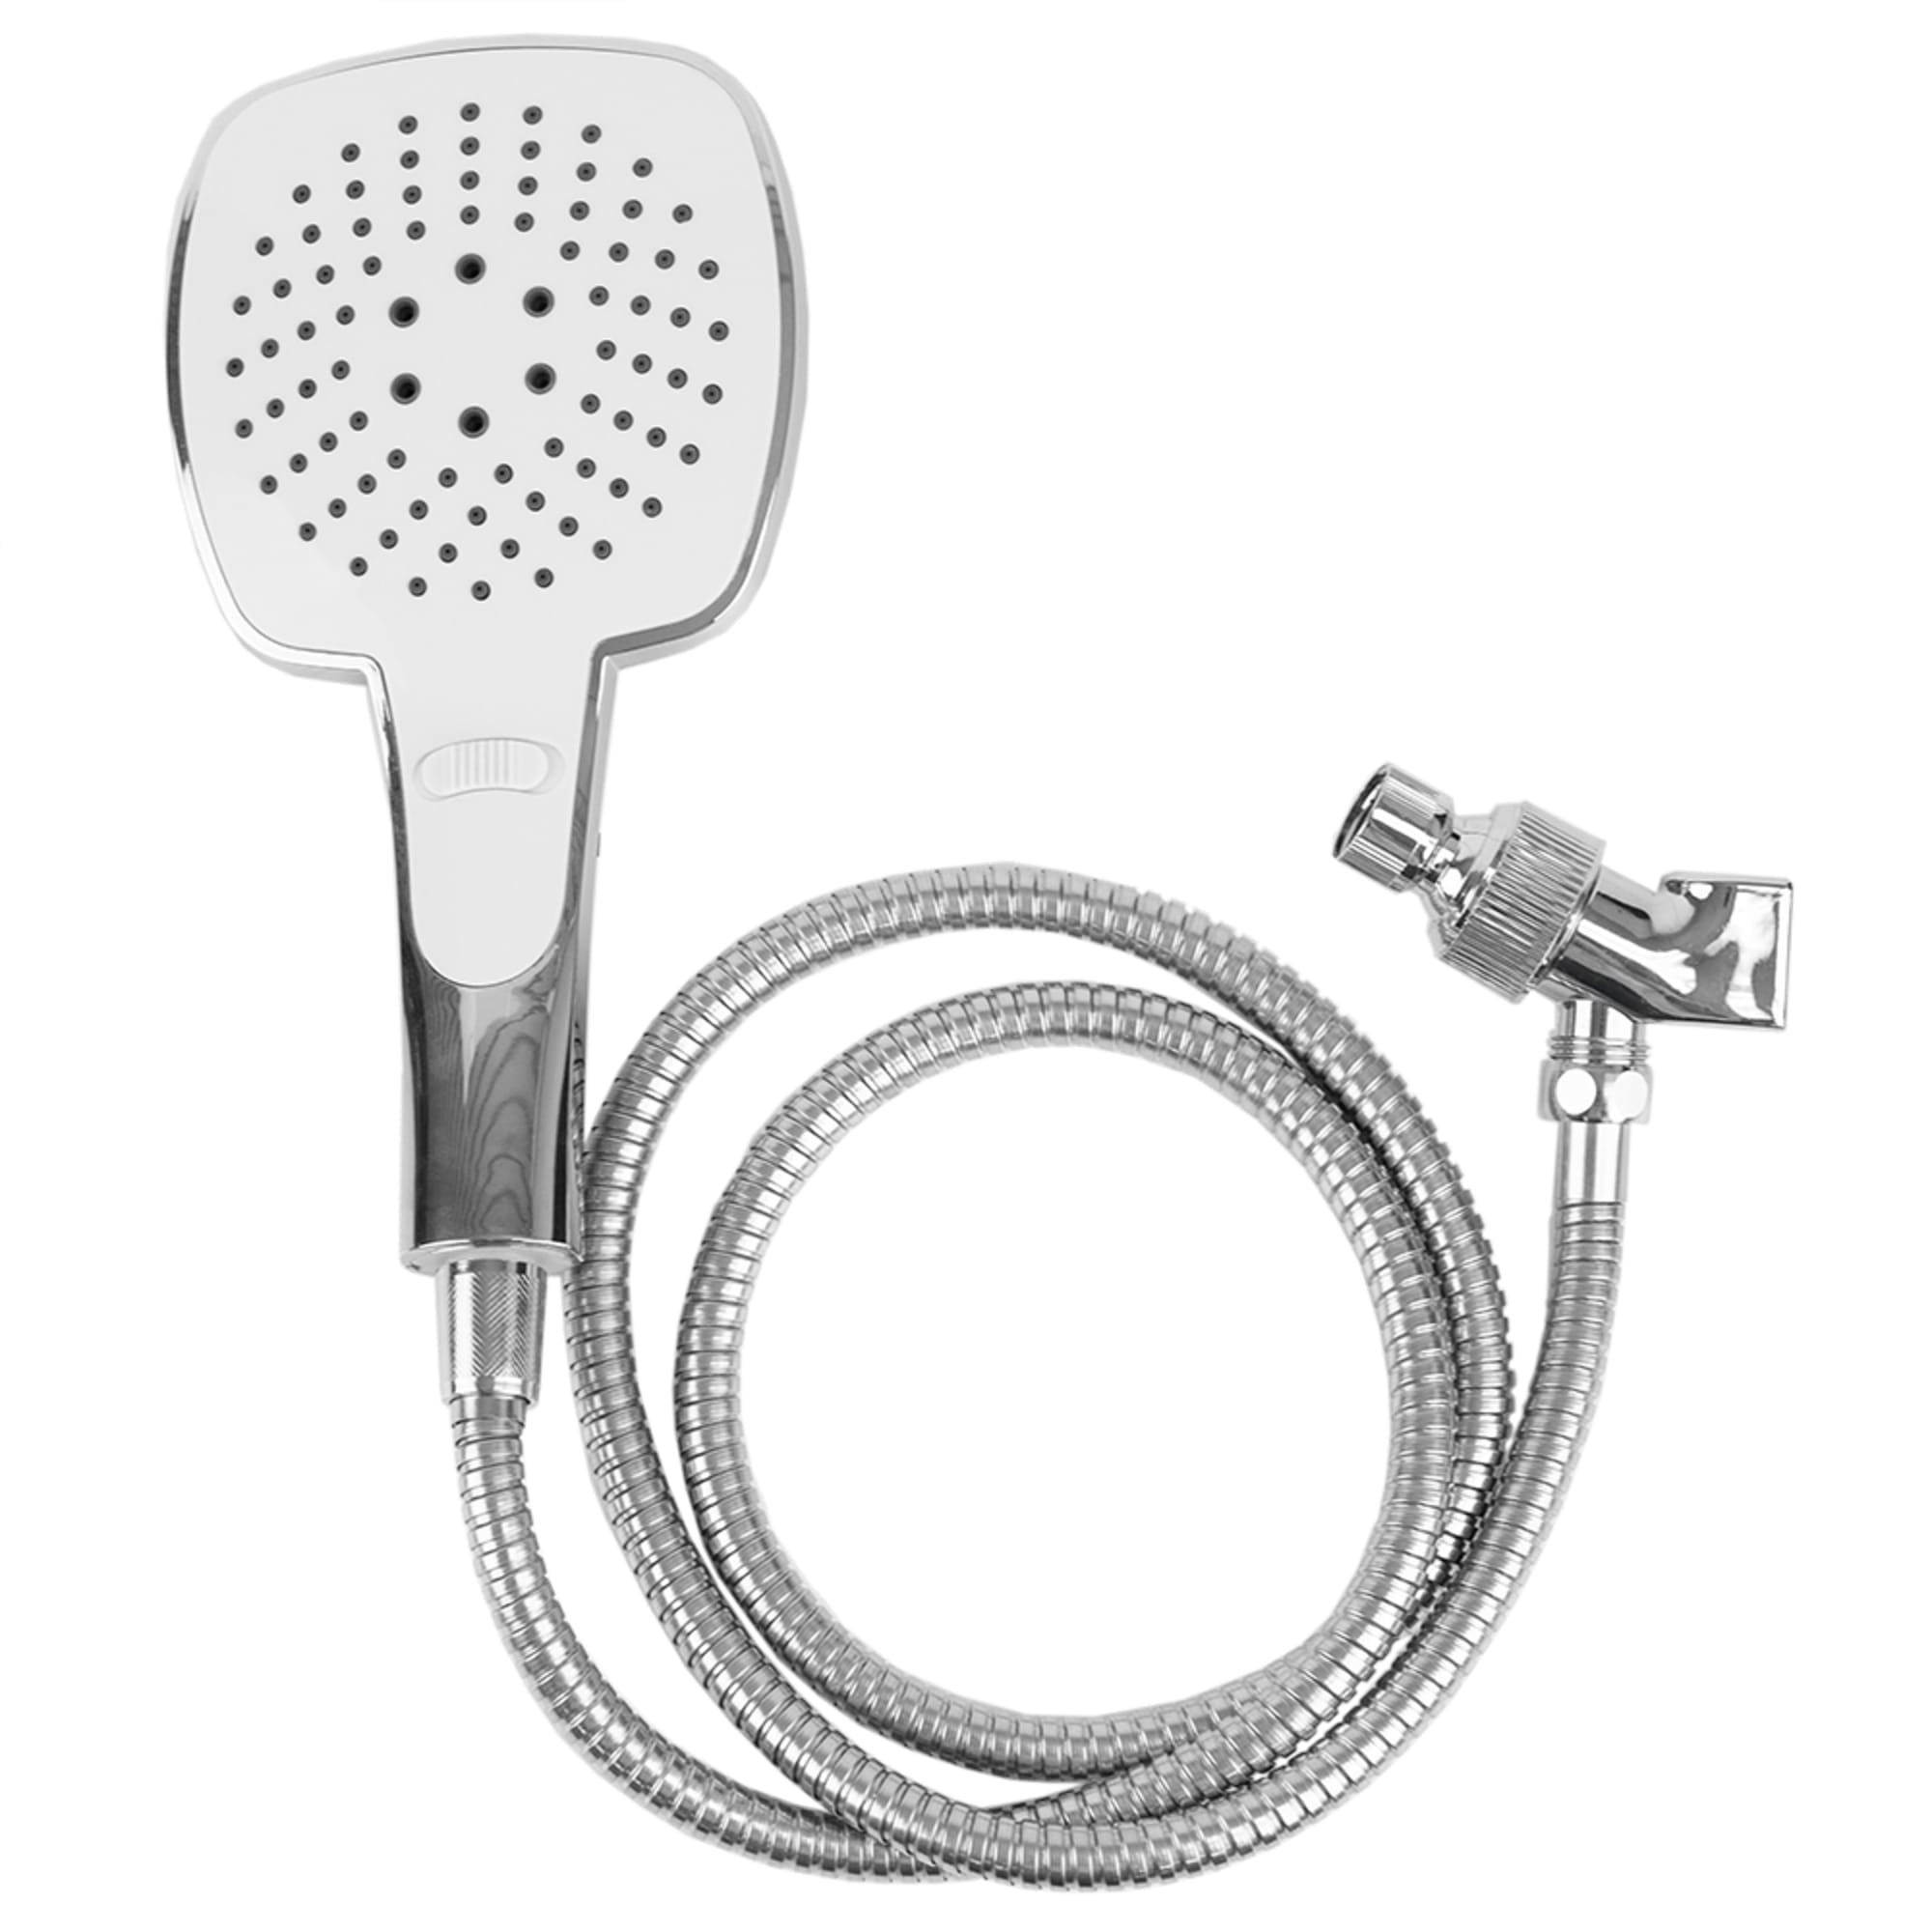 Home Basics Modern Luxury  Handheld 3 Function Shower Massager with 5 FT Hose and Integrated Pause Button, Chrome $12.00 EACH, CASE PACK OF 12